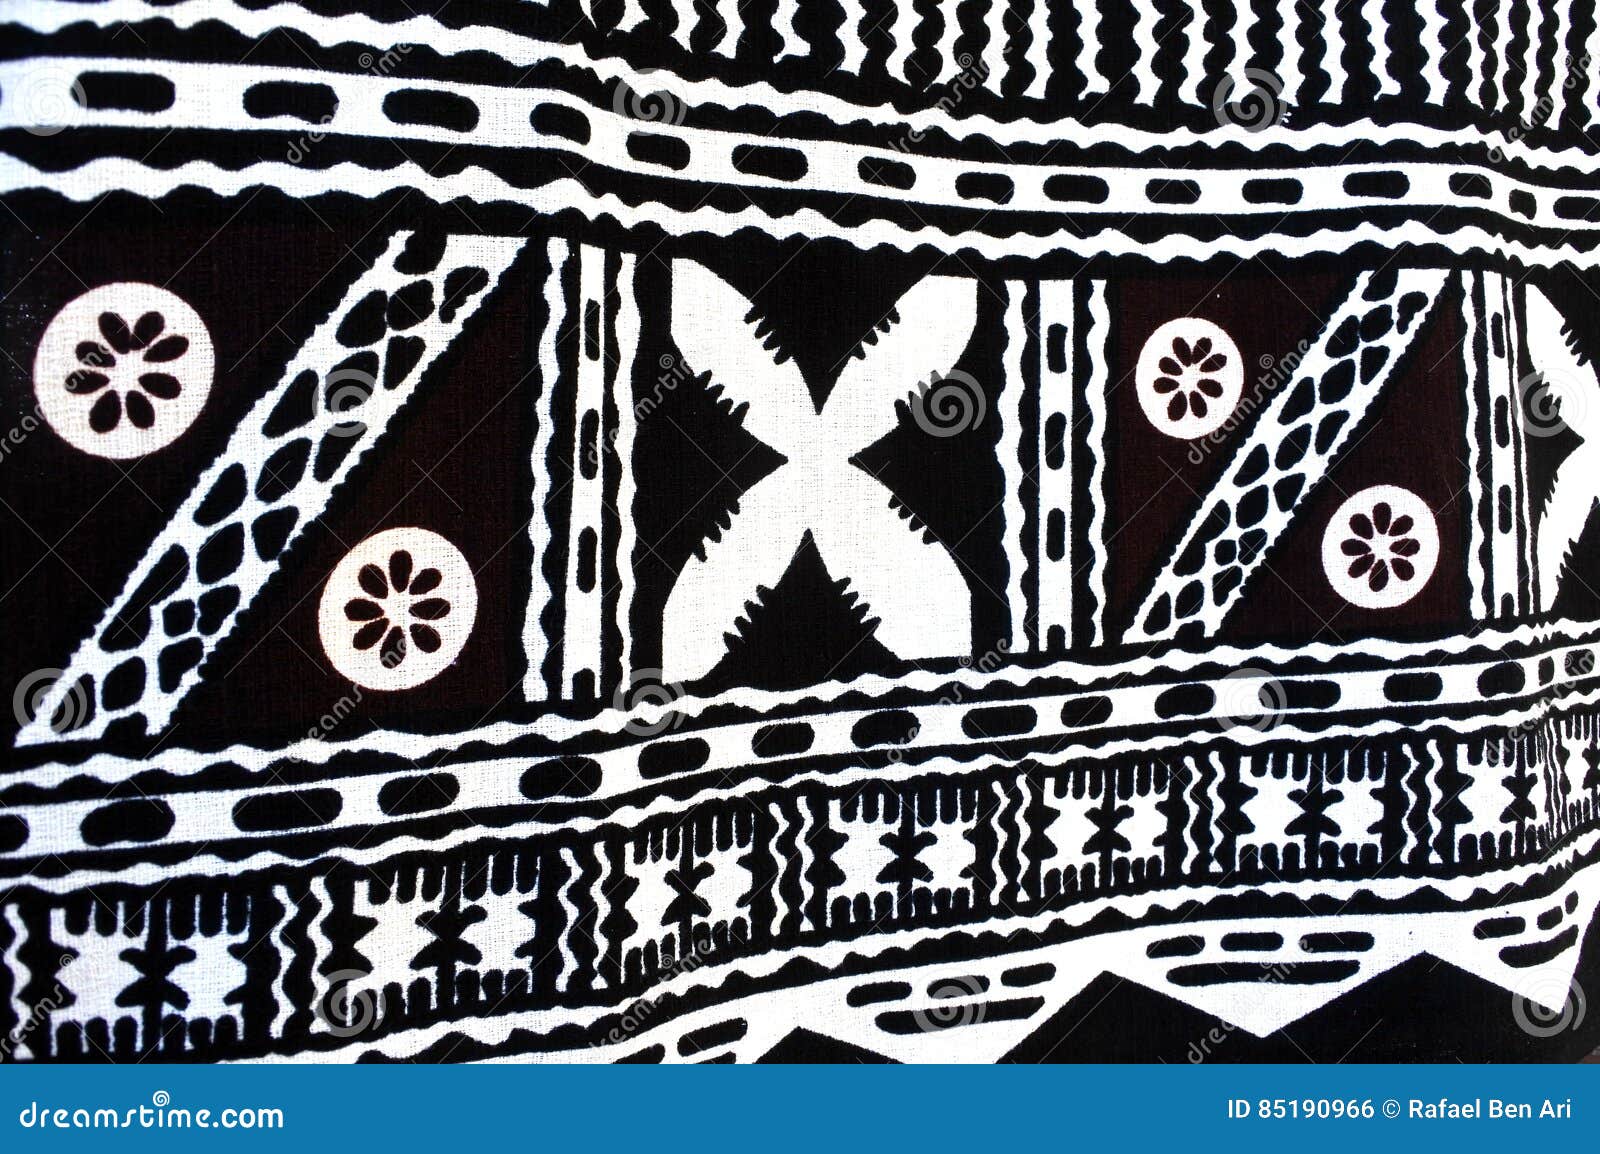 background of traditional pacific island tapa cloth